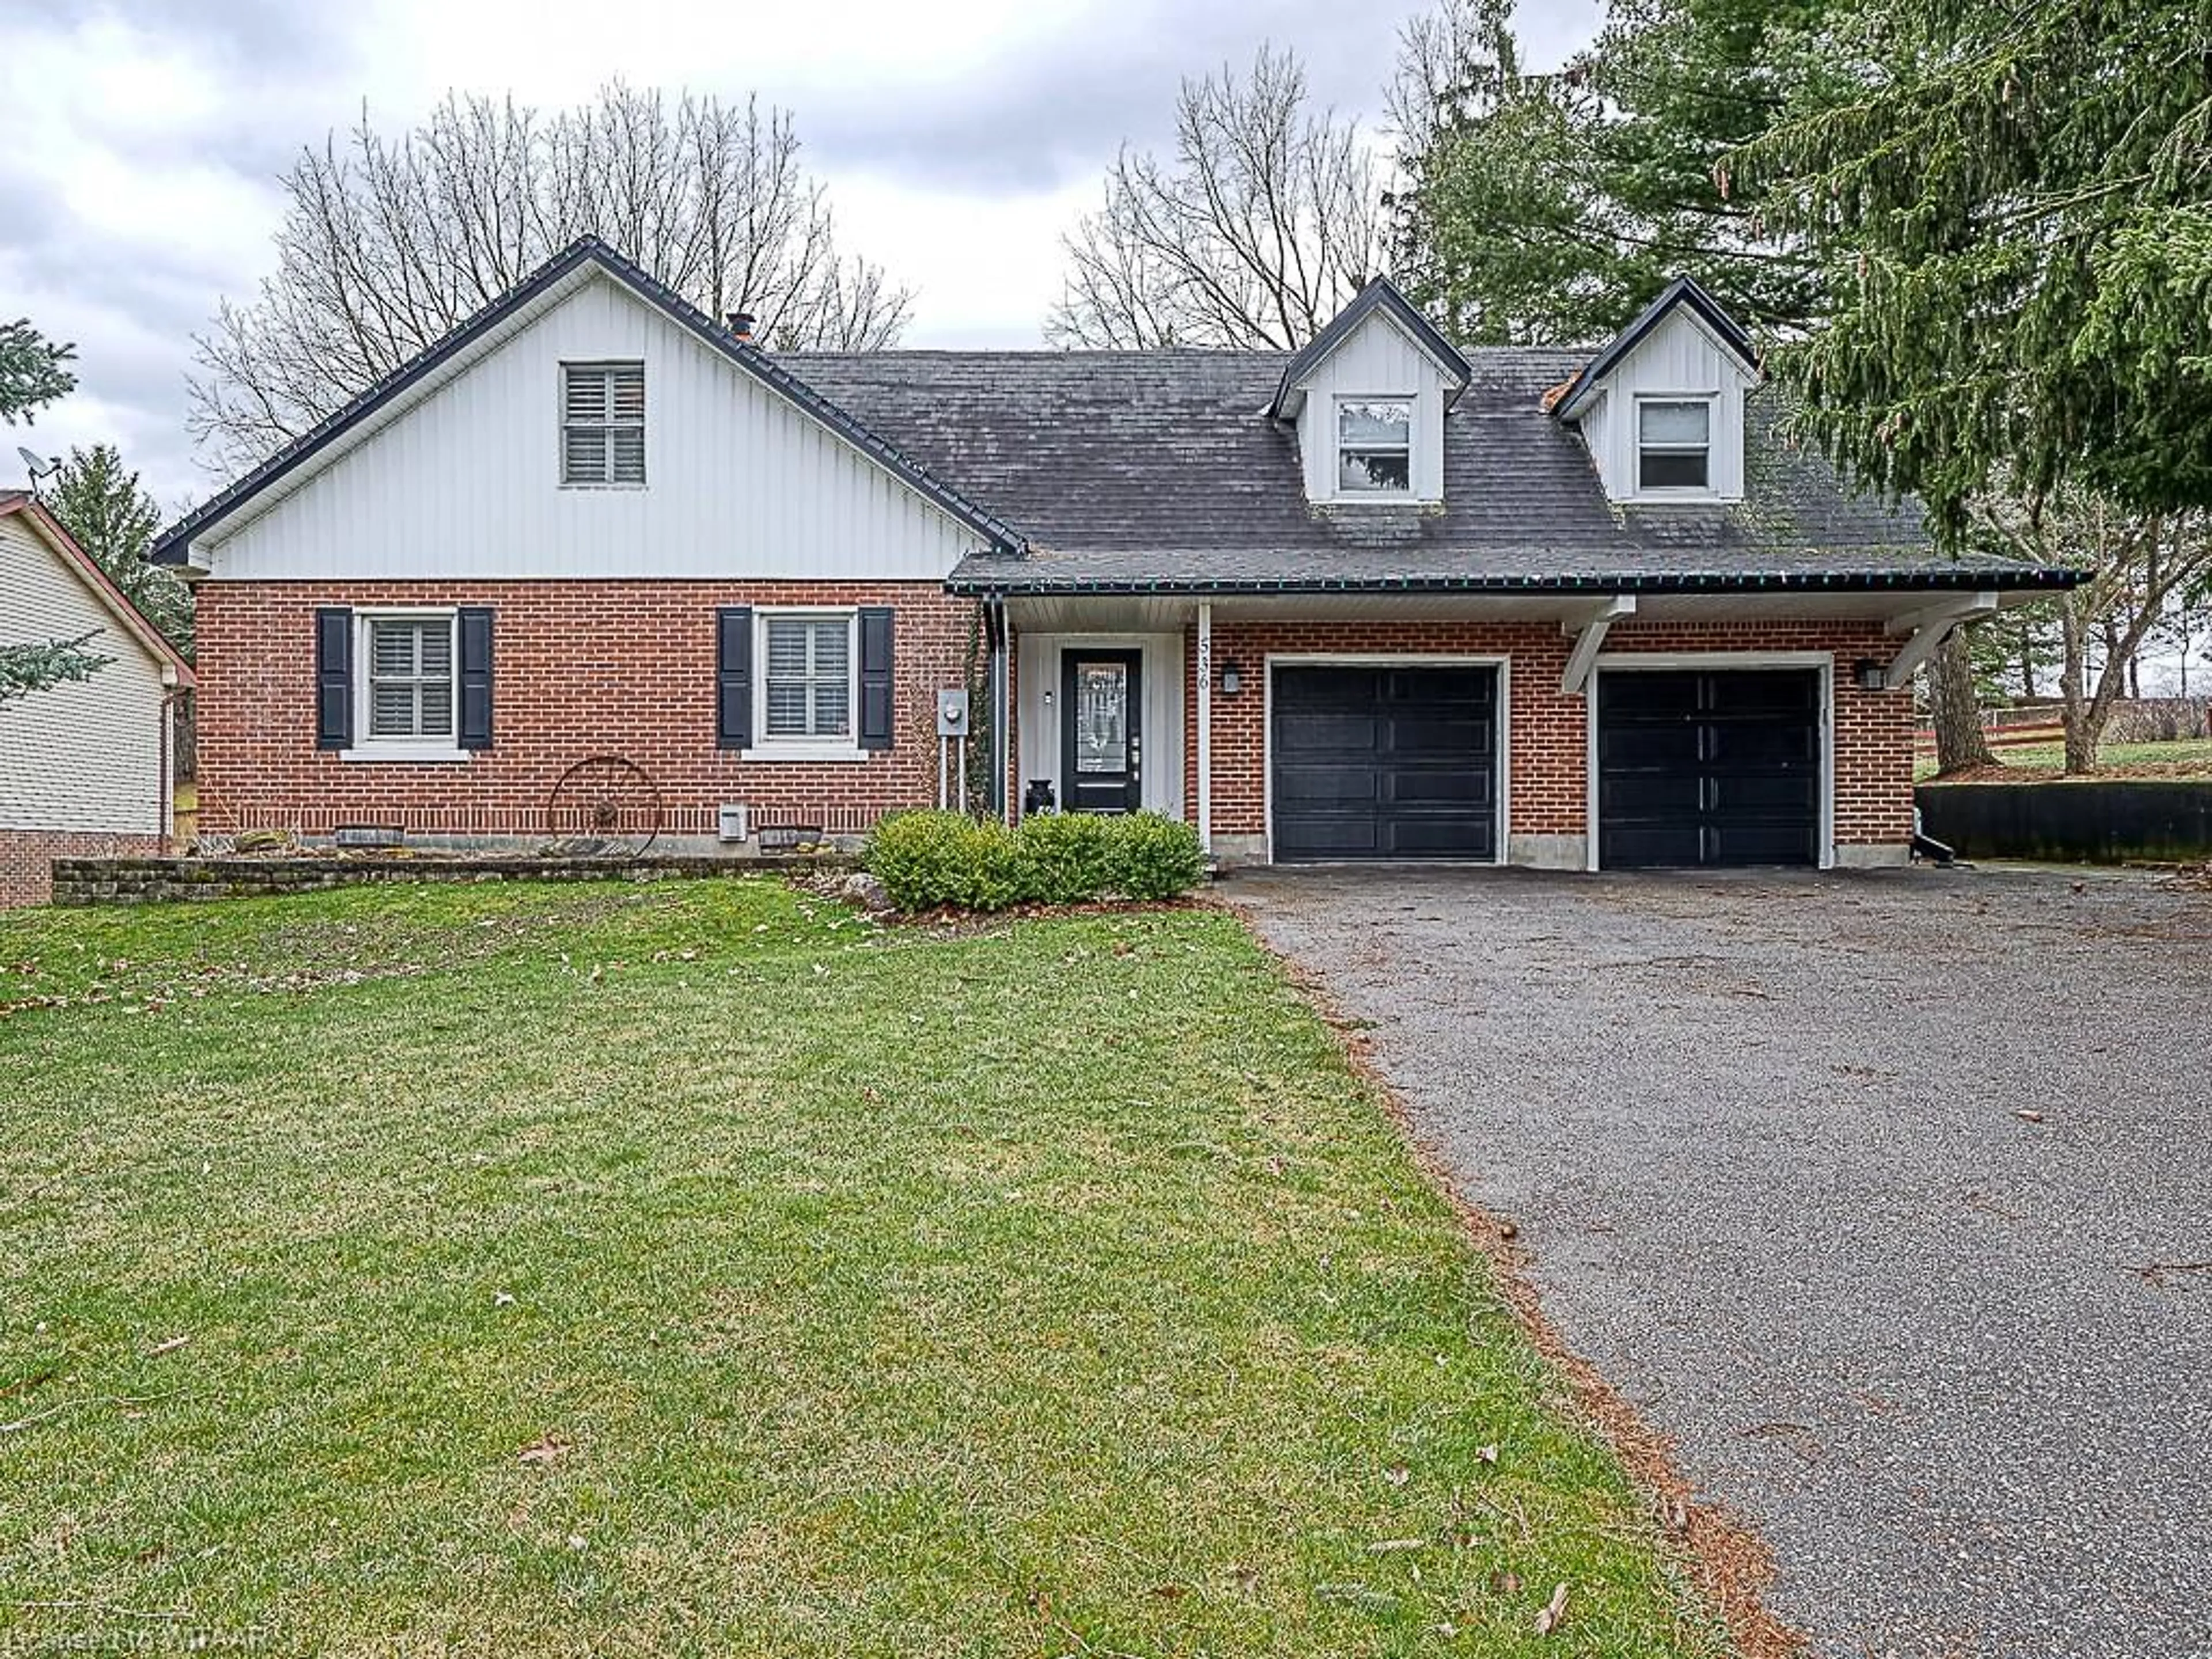 Home with brick exterior material for 536 Parkinson Rd, Woodstock Ontario N4S 2N6